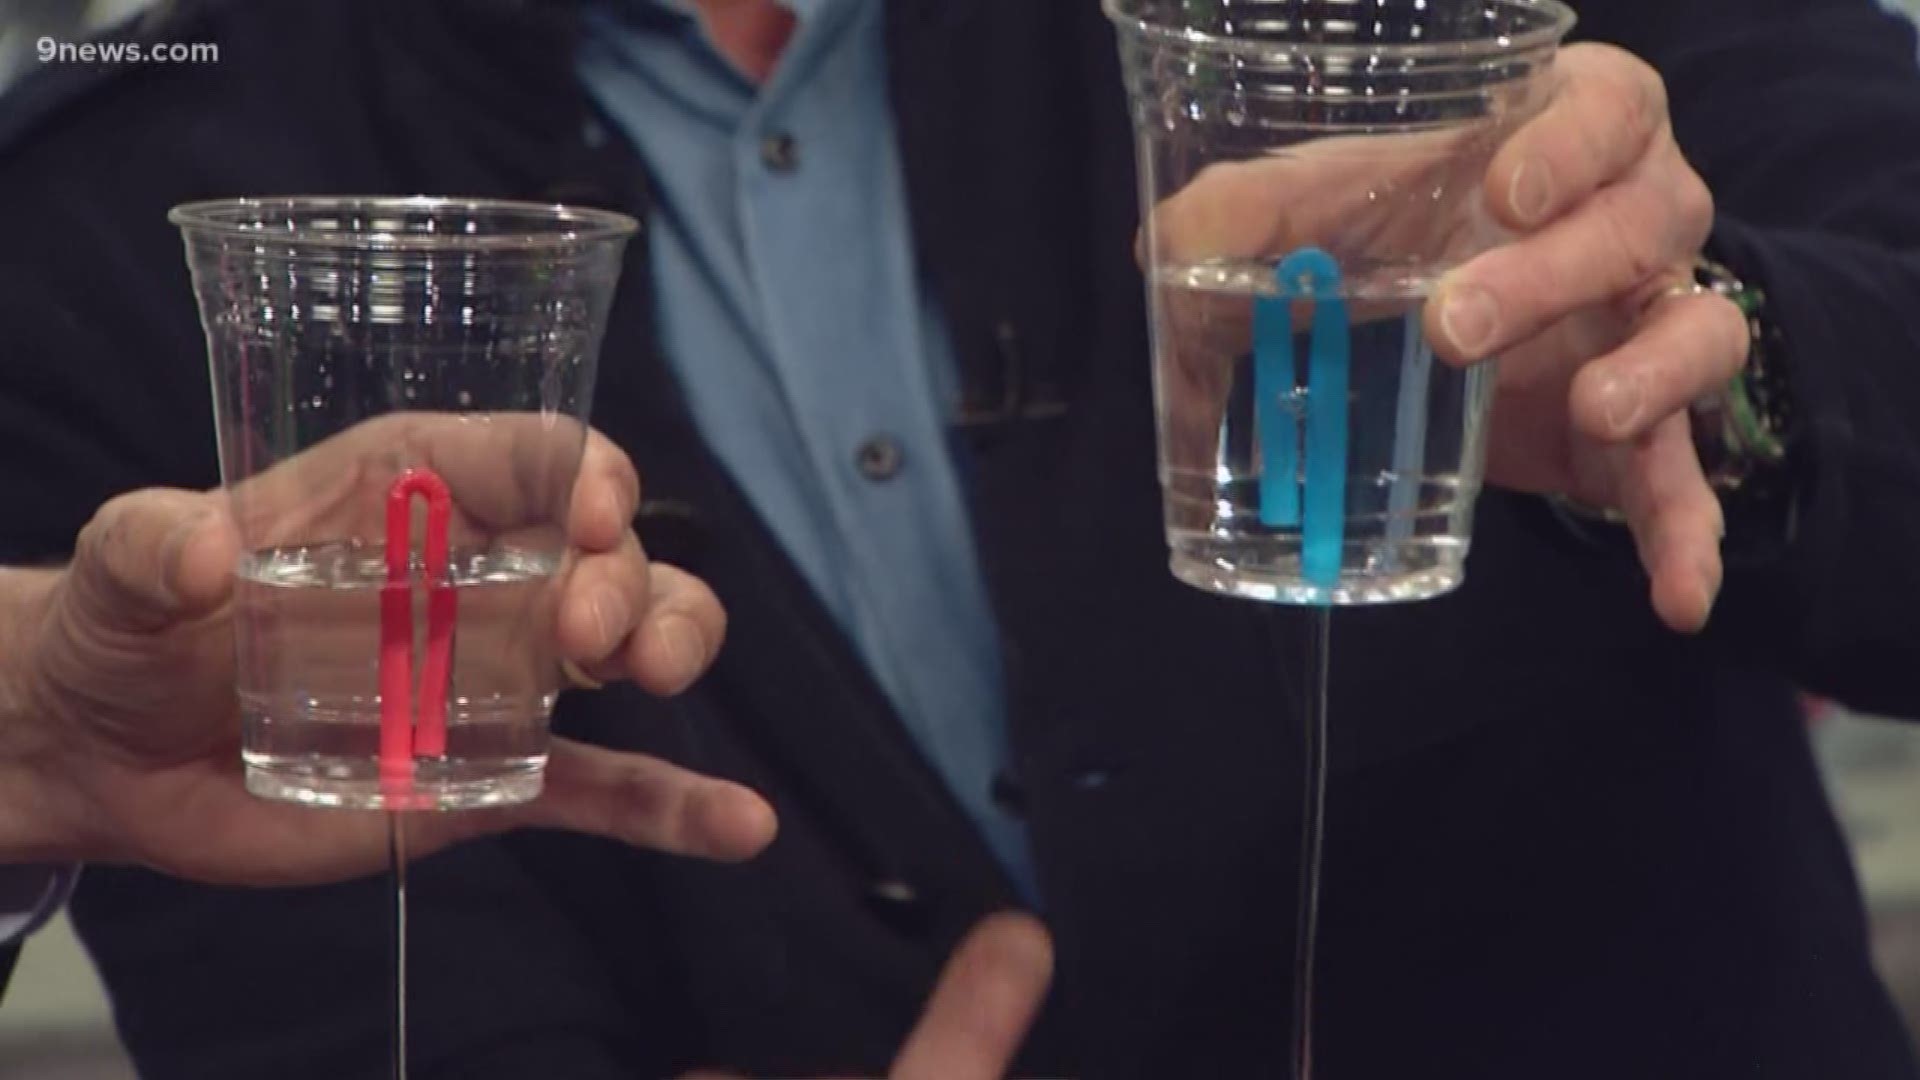 Our science guy Steve Spangler continues his series of simple and easy do-it-yourself projects that combine some clever science with a twist of mind-bending magic.